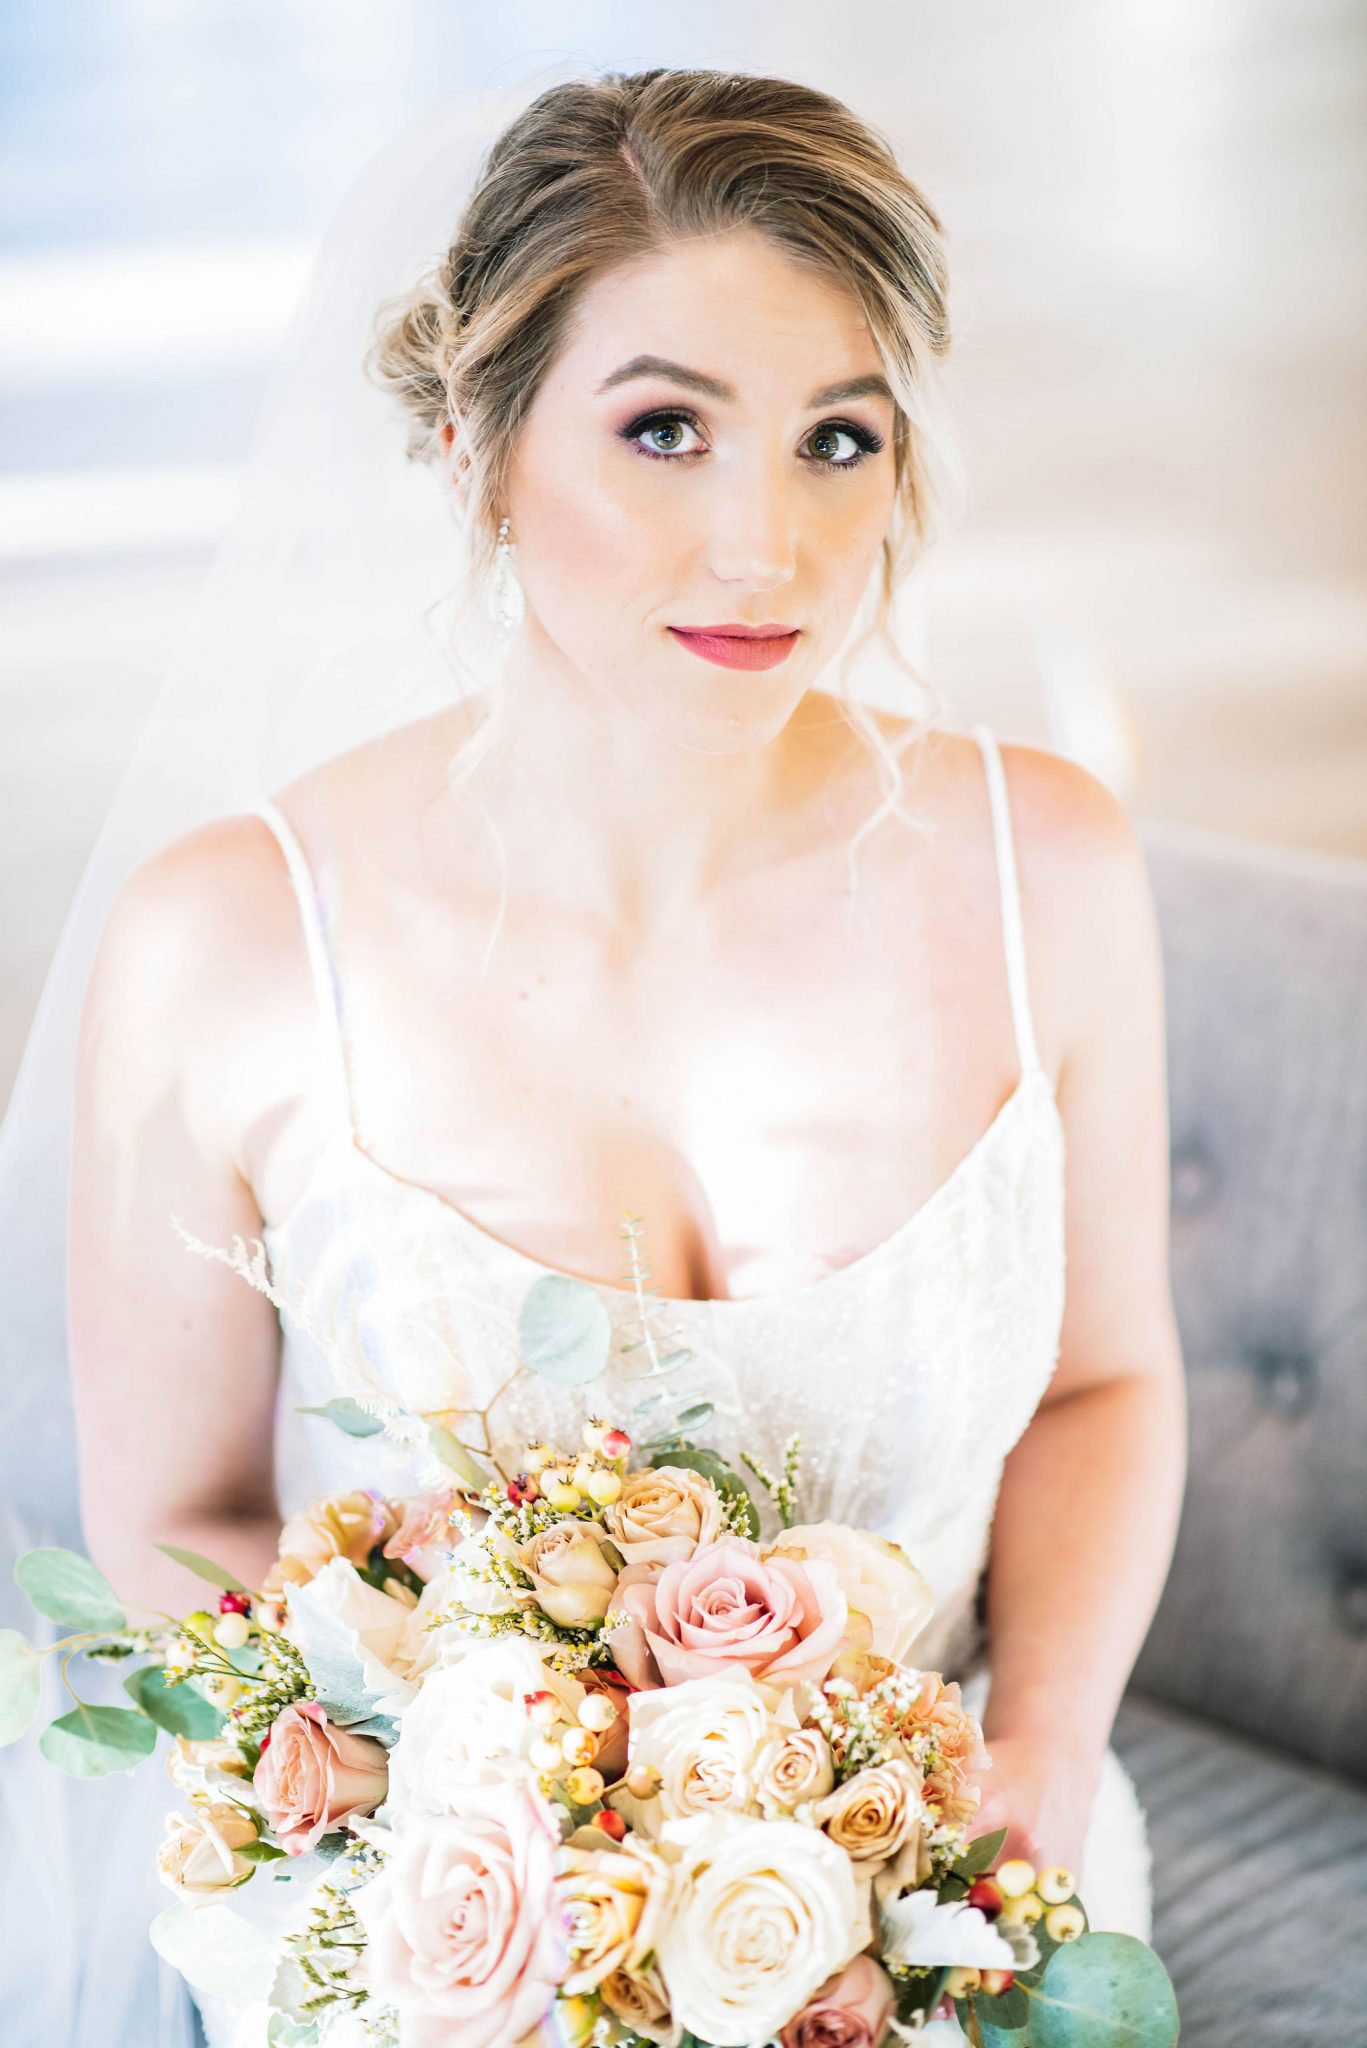 Bride with a romantic updo, soft flowing veil and blush bouquet poses for a bridal portrait at the Norland Historic Estate Venue